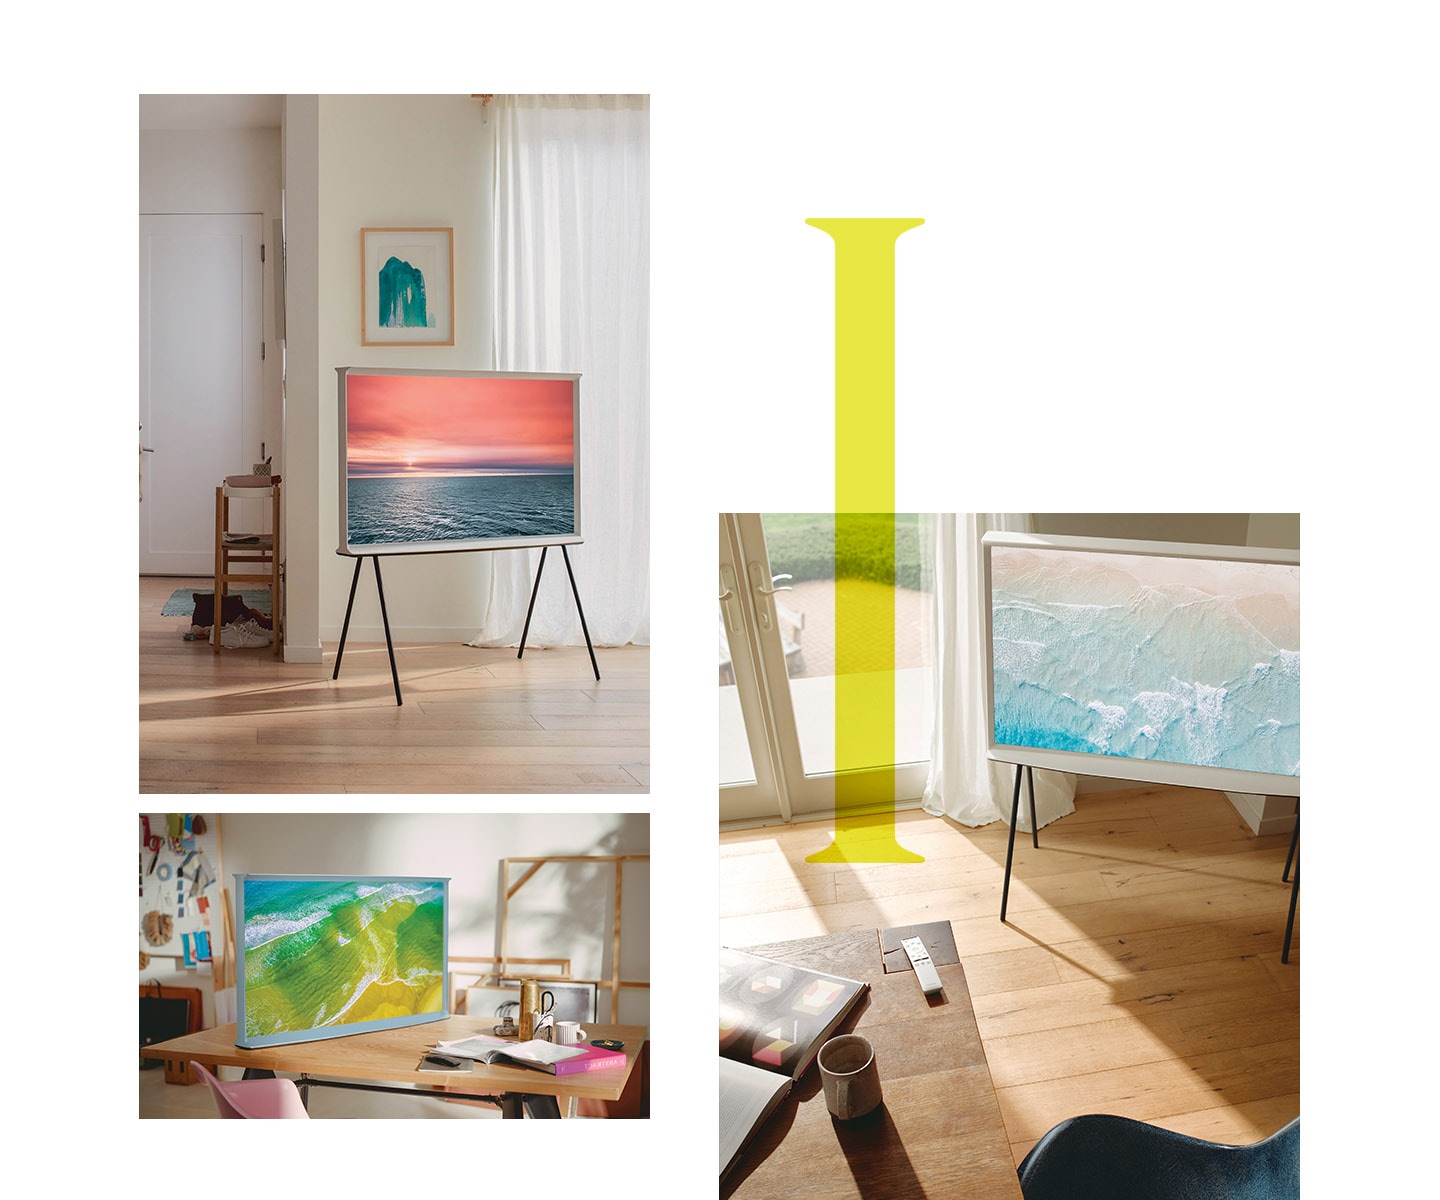 The Serif products are shown in three stylish rooms, two on detachable stands and one on a tabletop, and all showing beautiful ocean images onscreen.